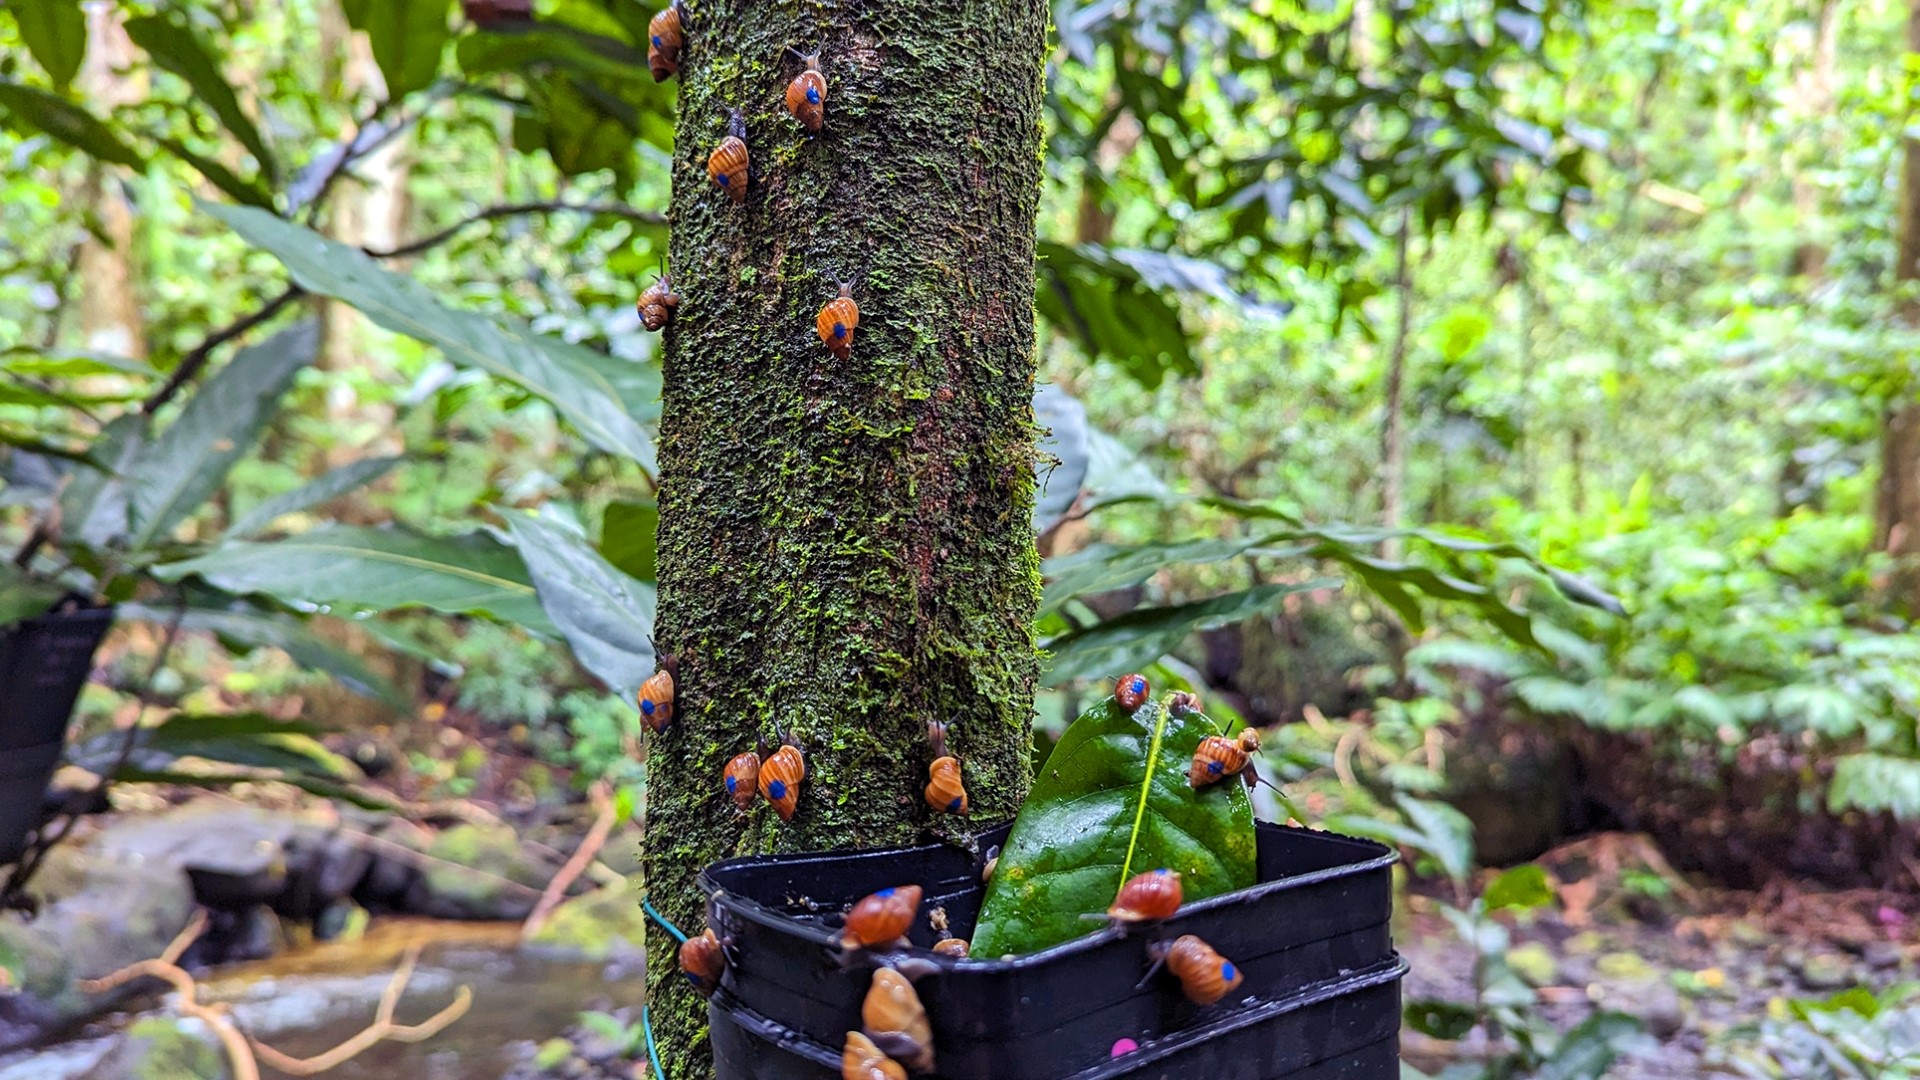 Earlier this month, two Akron Zoo officials traveled to Tahiti to release 1,100 Partula snails that had been bred in Akron. (Video courtesy of Akron Zoo)